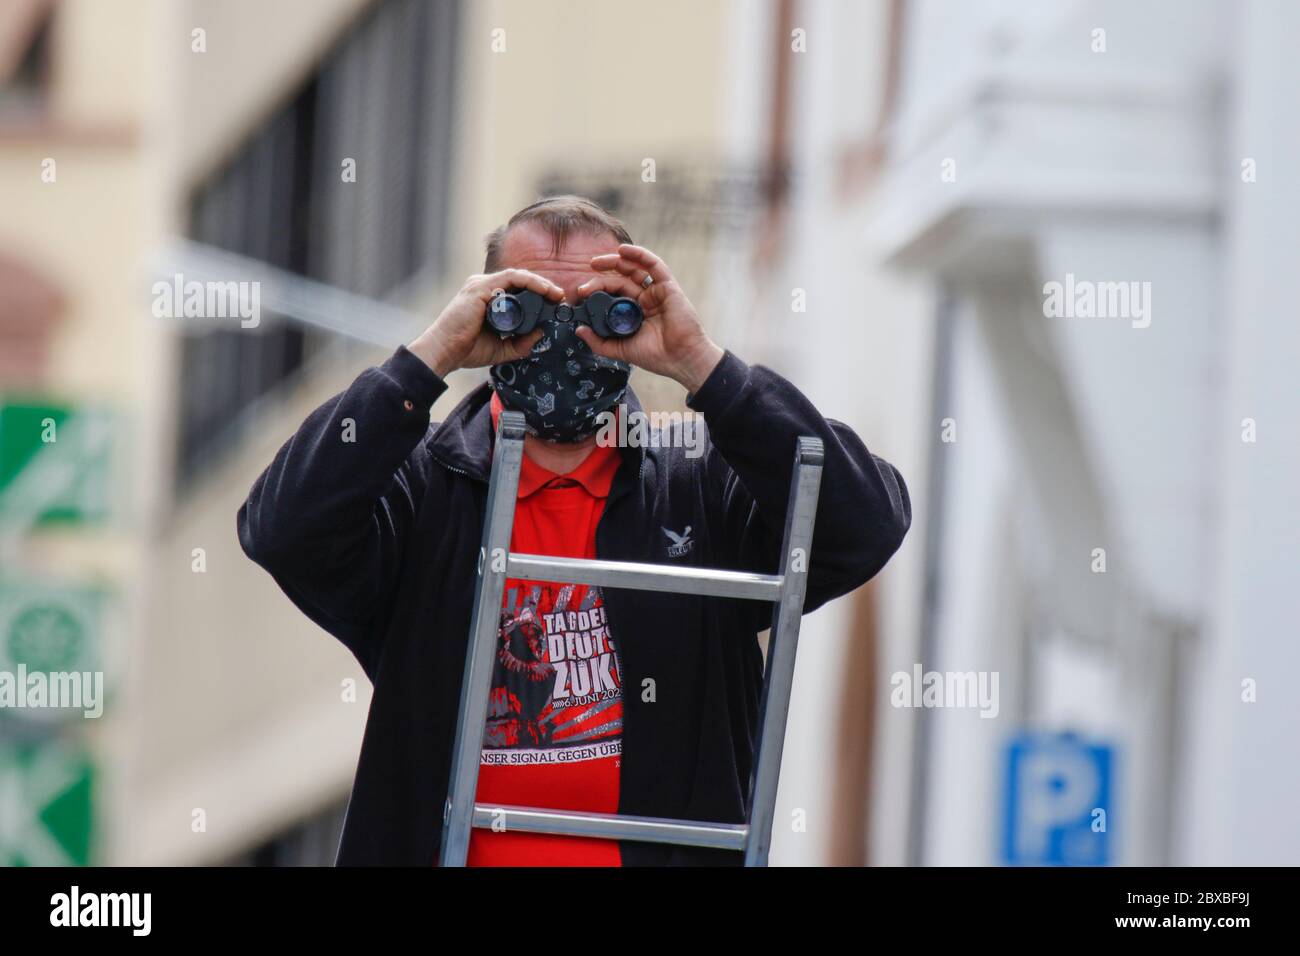 Worms, Germany. 6th June 2020. A right-wing protester stands on a ladder, looking down the protest route with binoculars. Around 50 right-wing protesters marched through the city centre of Worms for the 12. and last 'Day of the German Future’. The march was cut short due to several hundred counter protesters who blocked the  path of the right-wing march. The march was a yearly right-wing event in different German city that drew over 1000 protesters at its high-point. Stock Photo